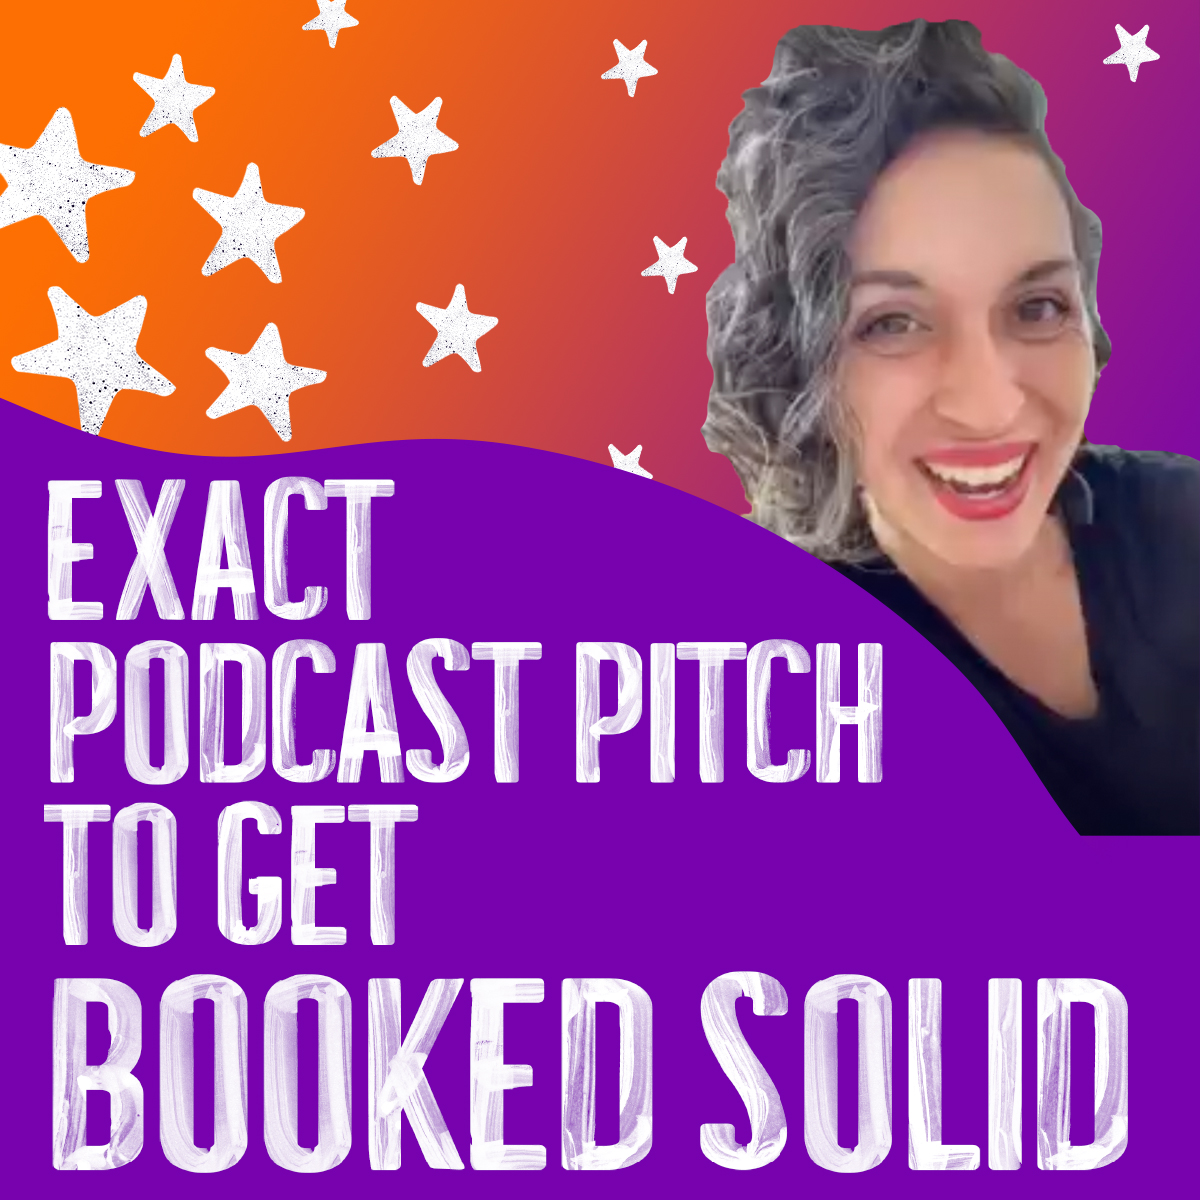 exact_podcast_pitch